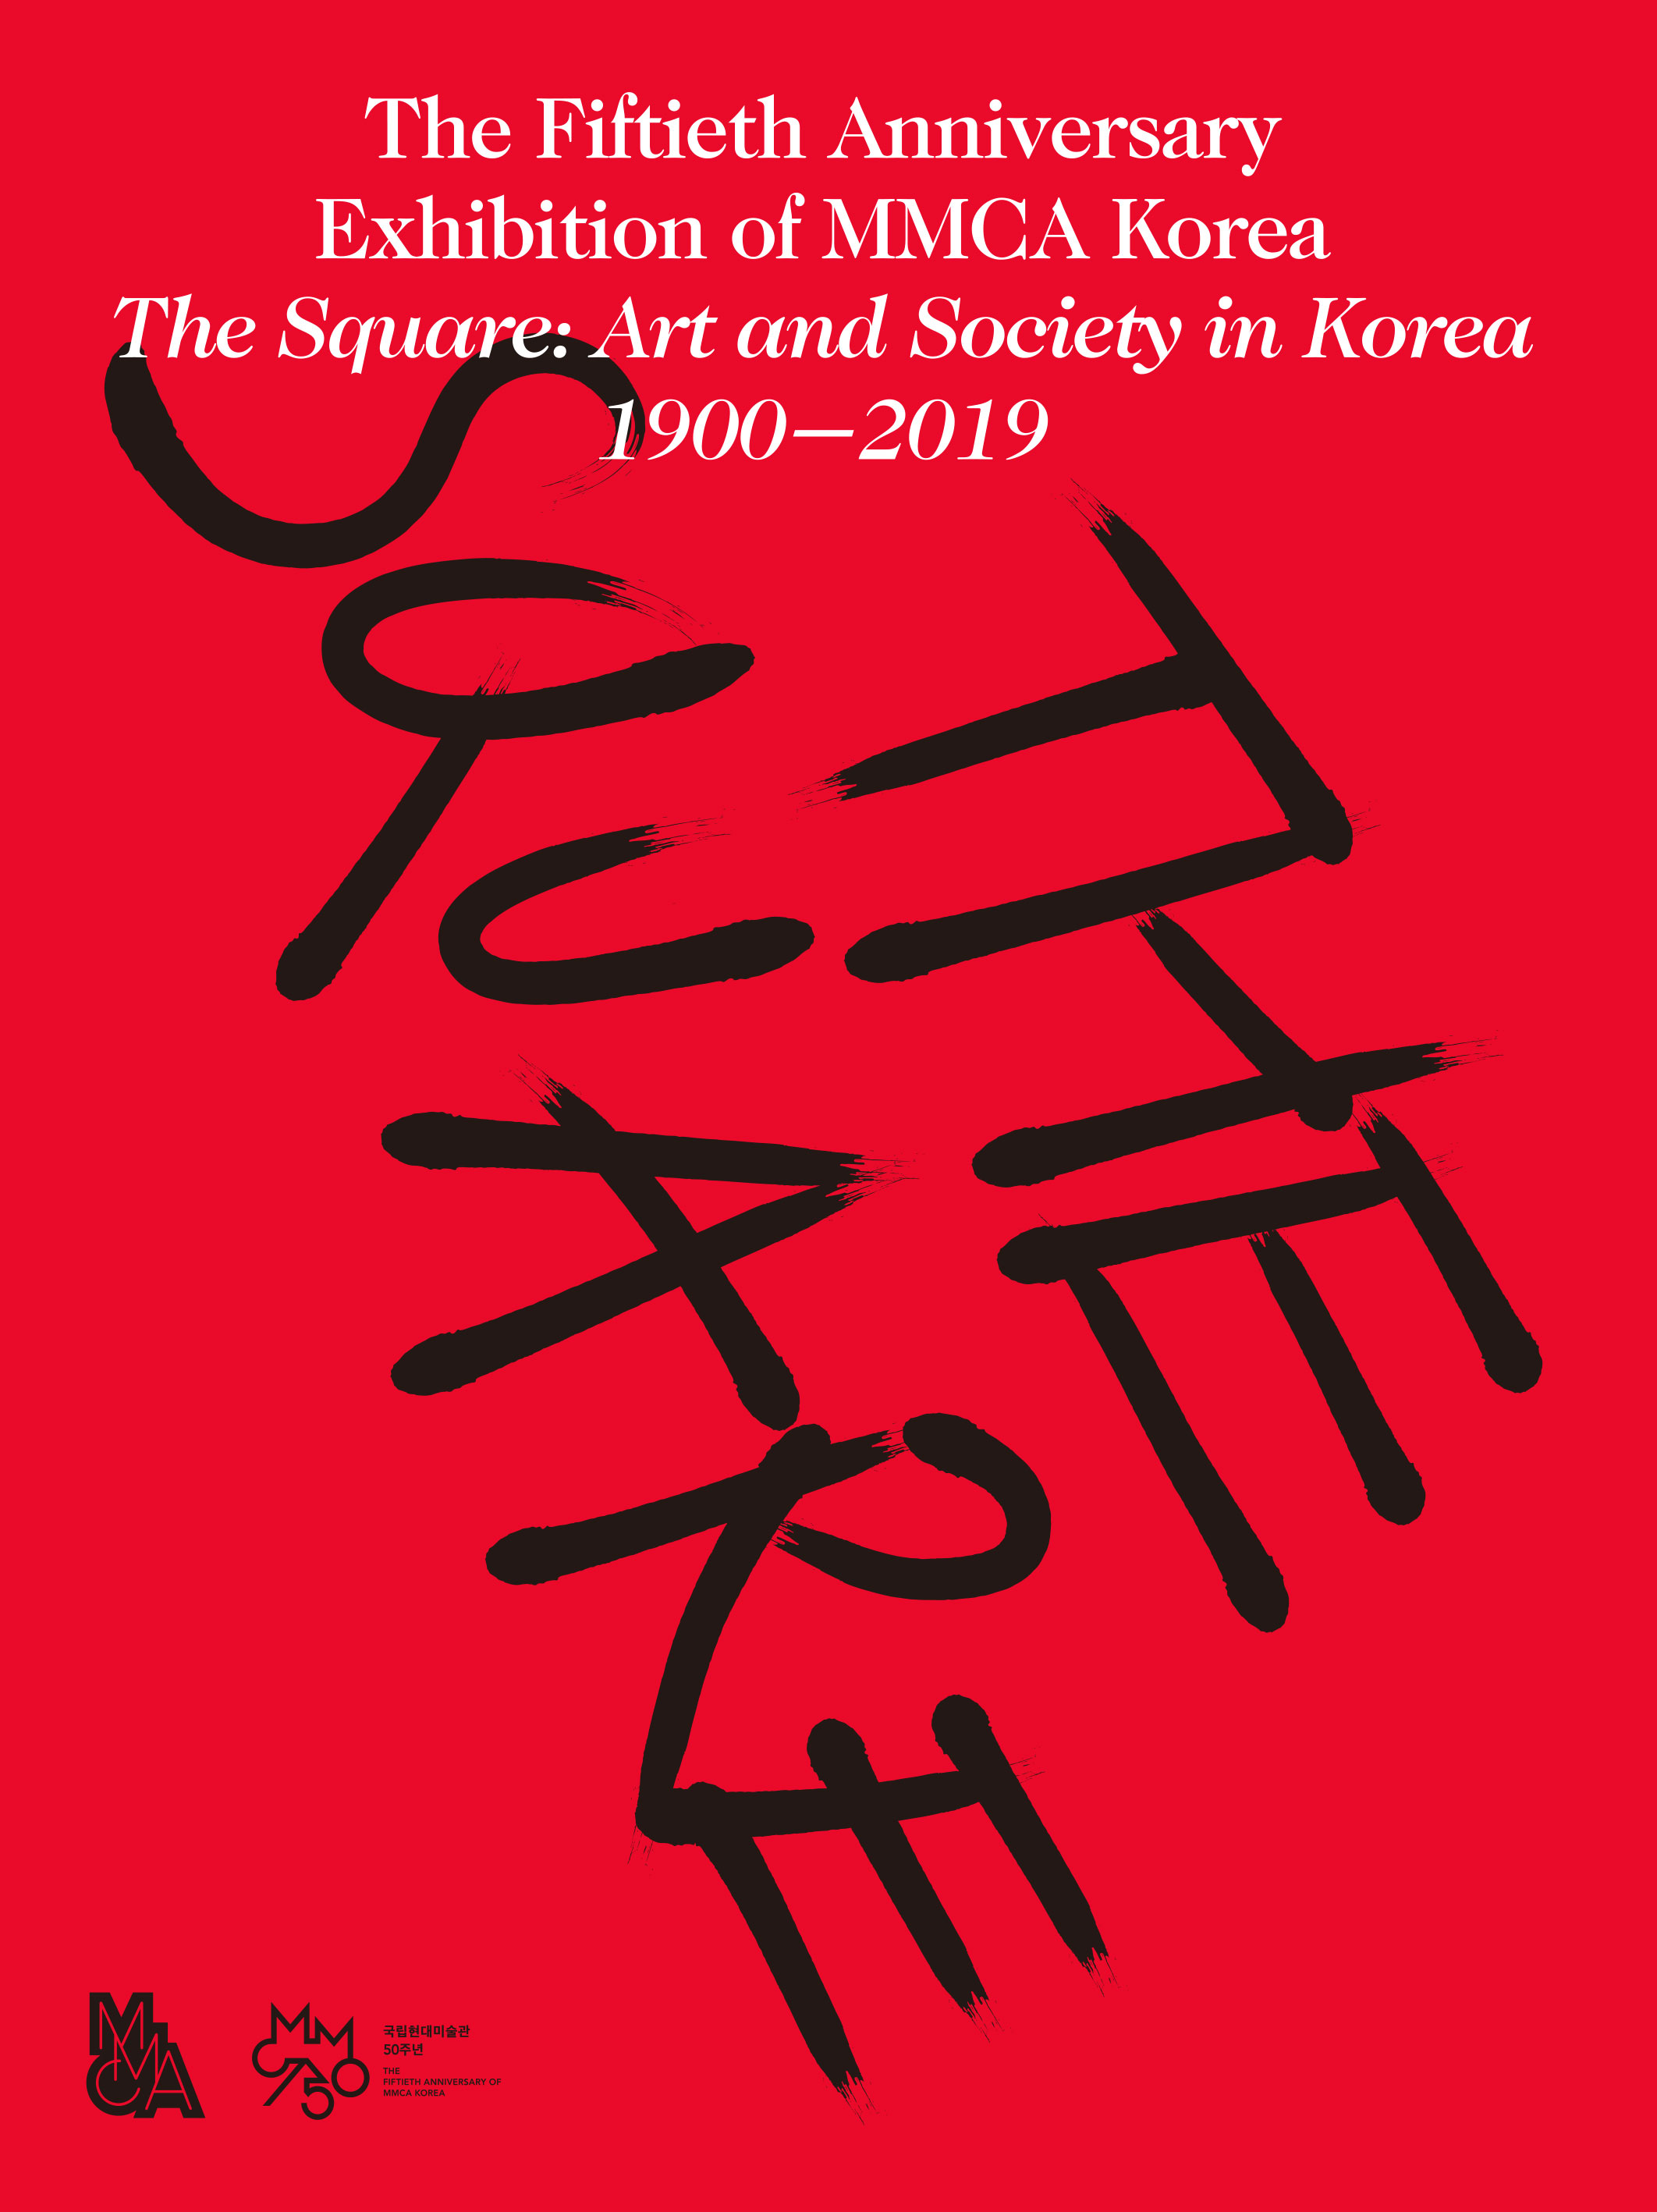 The Square: Art and Society in Korea 1900 -2019